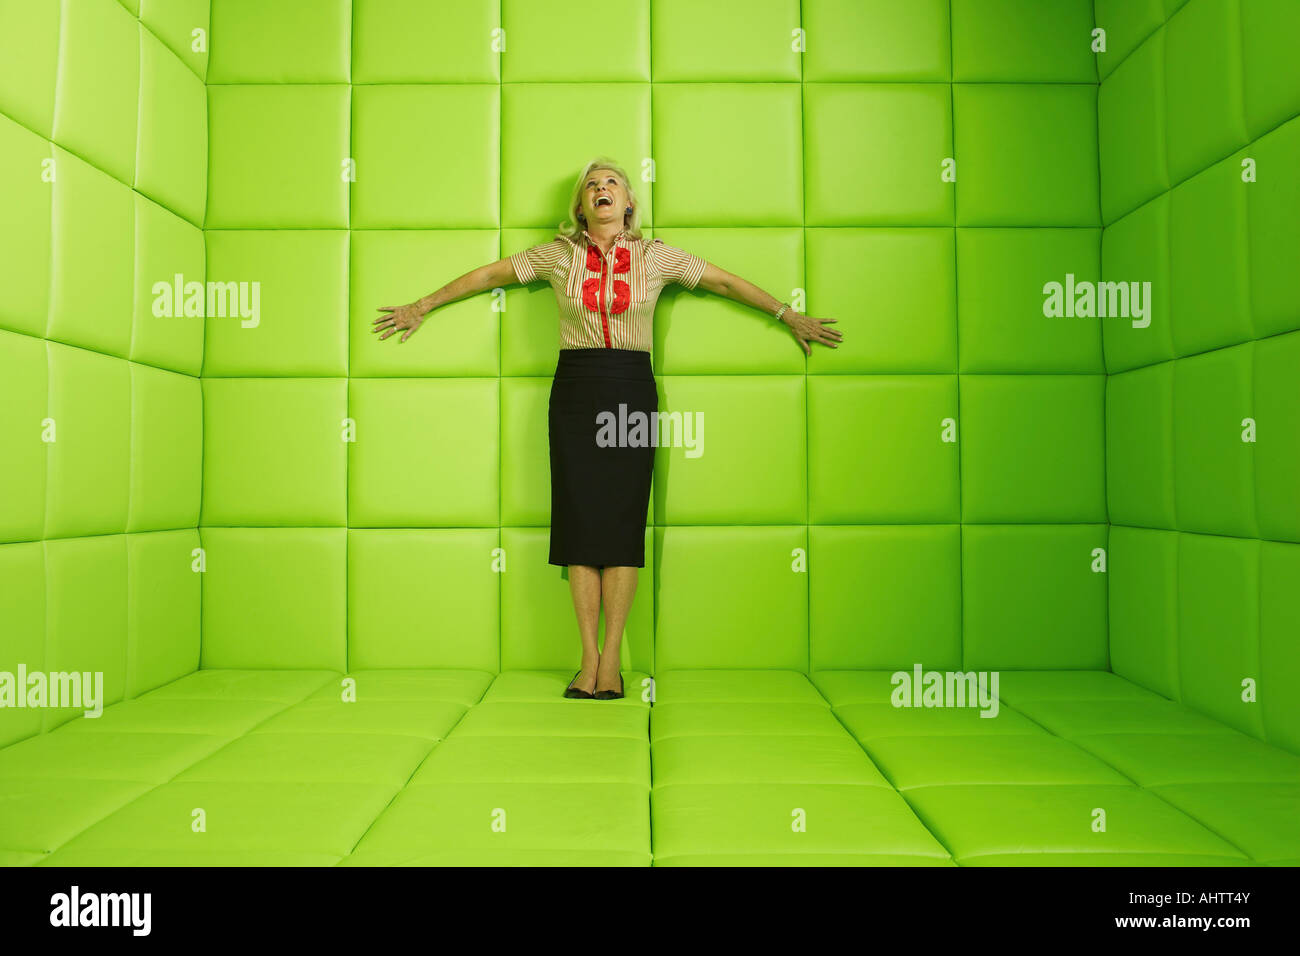 Woman laughing standing against wall of green padded cell Stock Photo